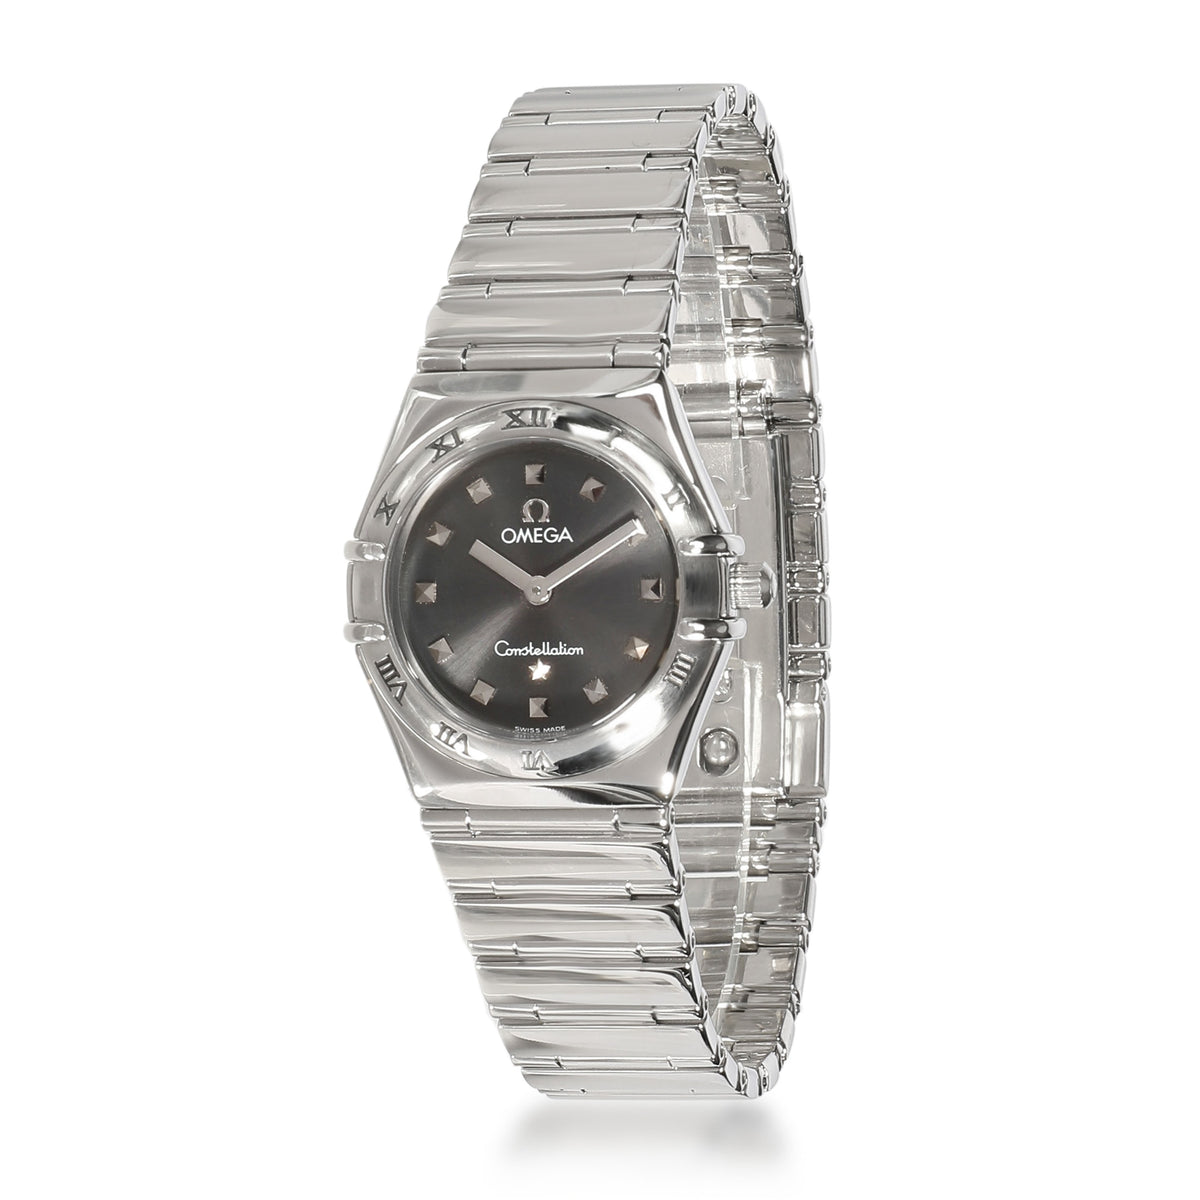 Omega Constellation 1571.51.00 Women's Watch in  Stainless Steel